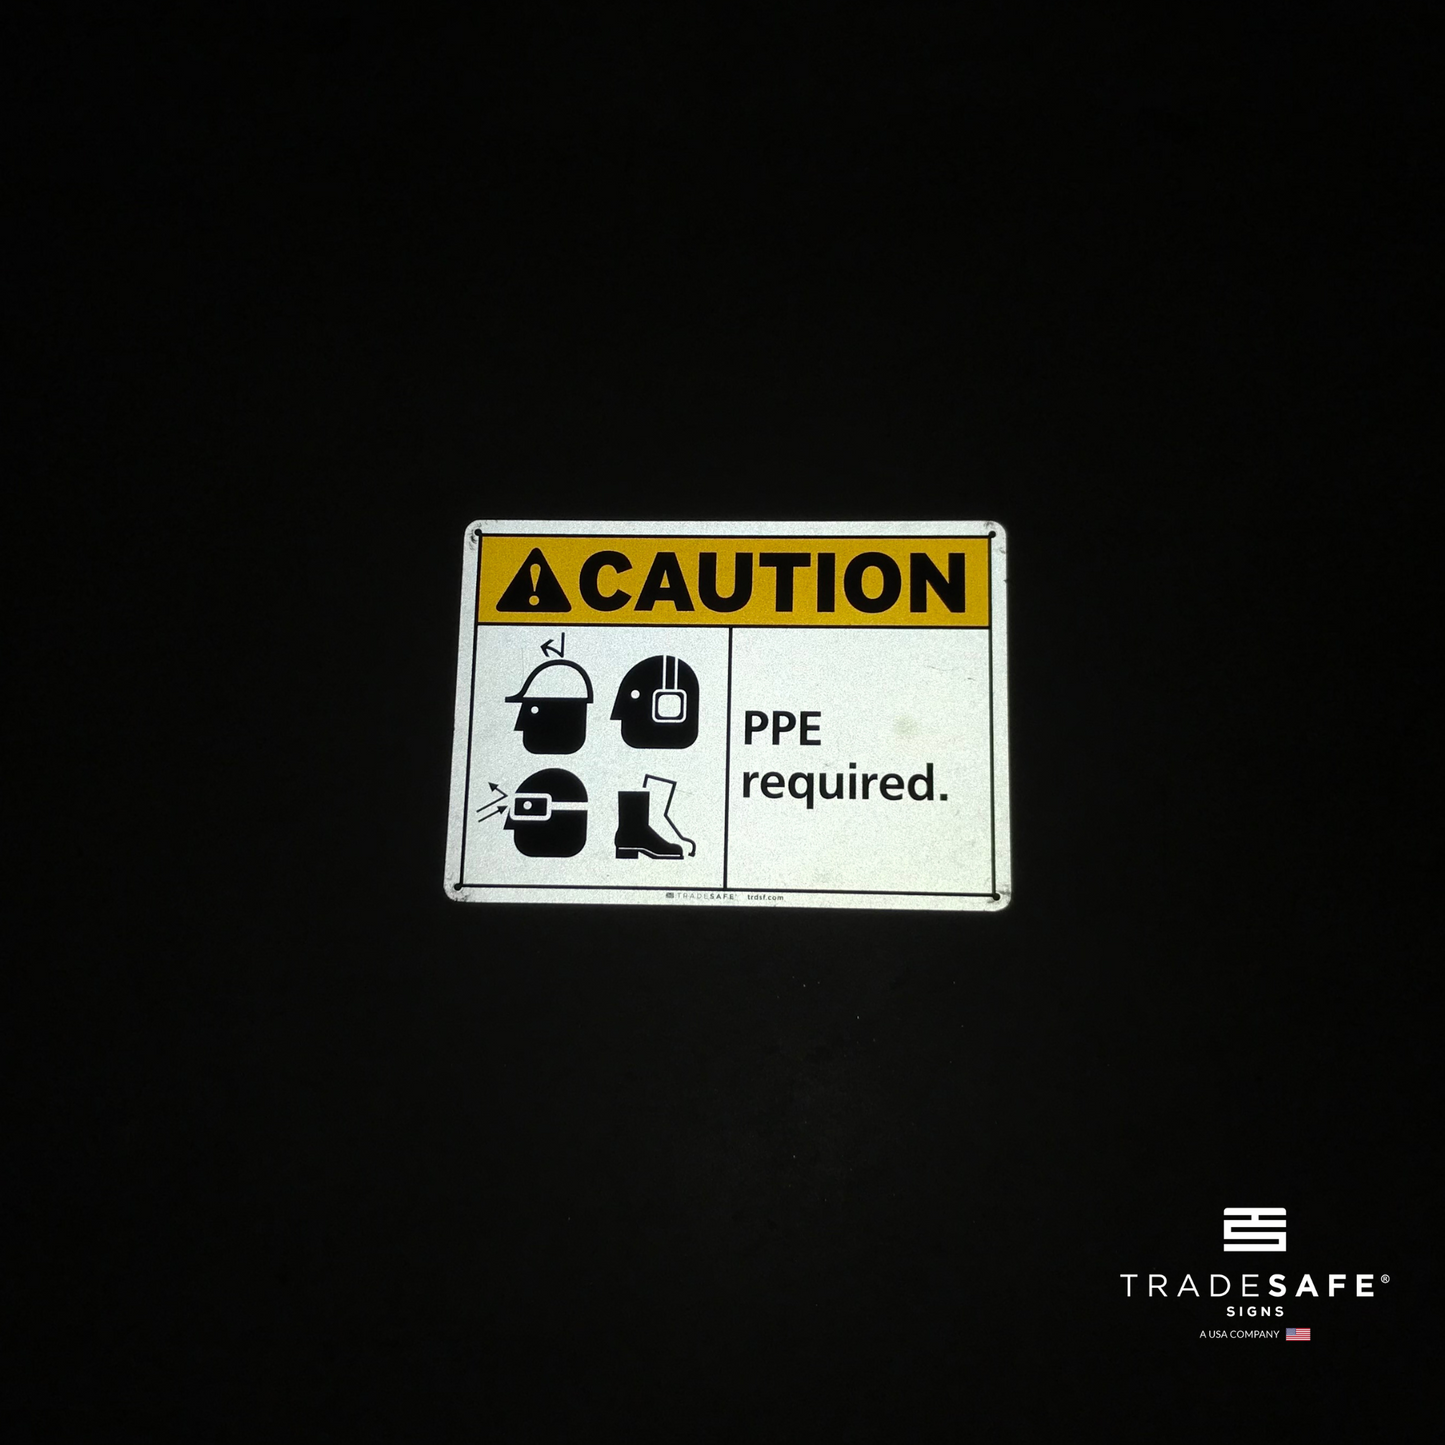 reflective attribute of caution sign on black background